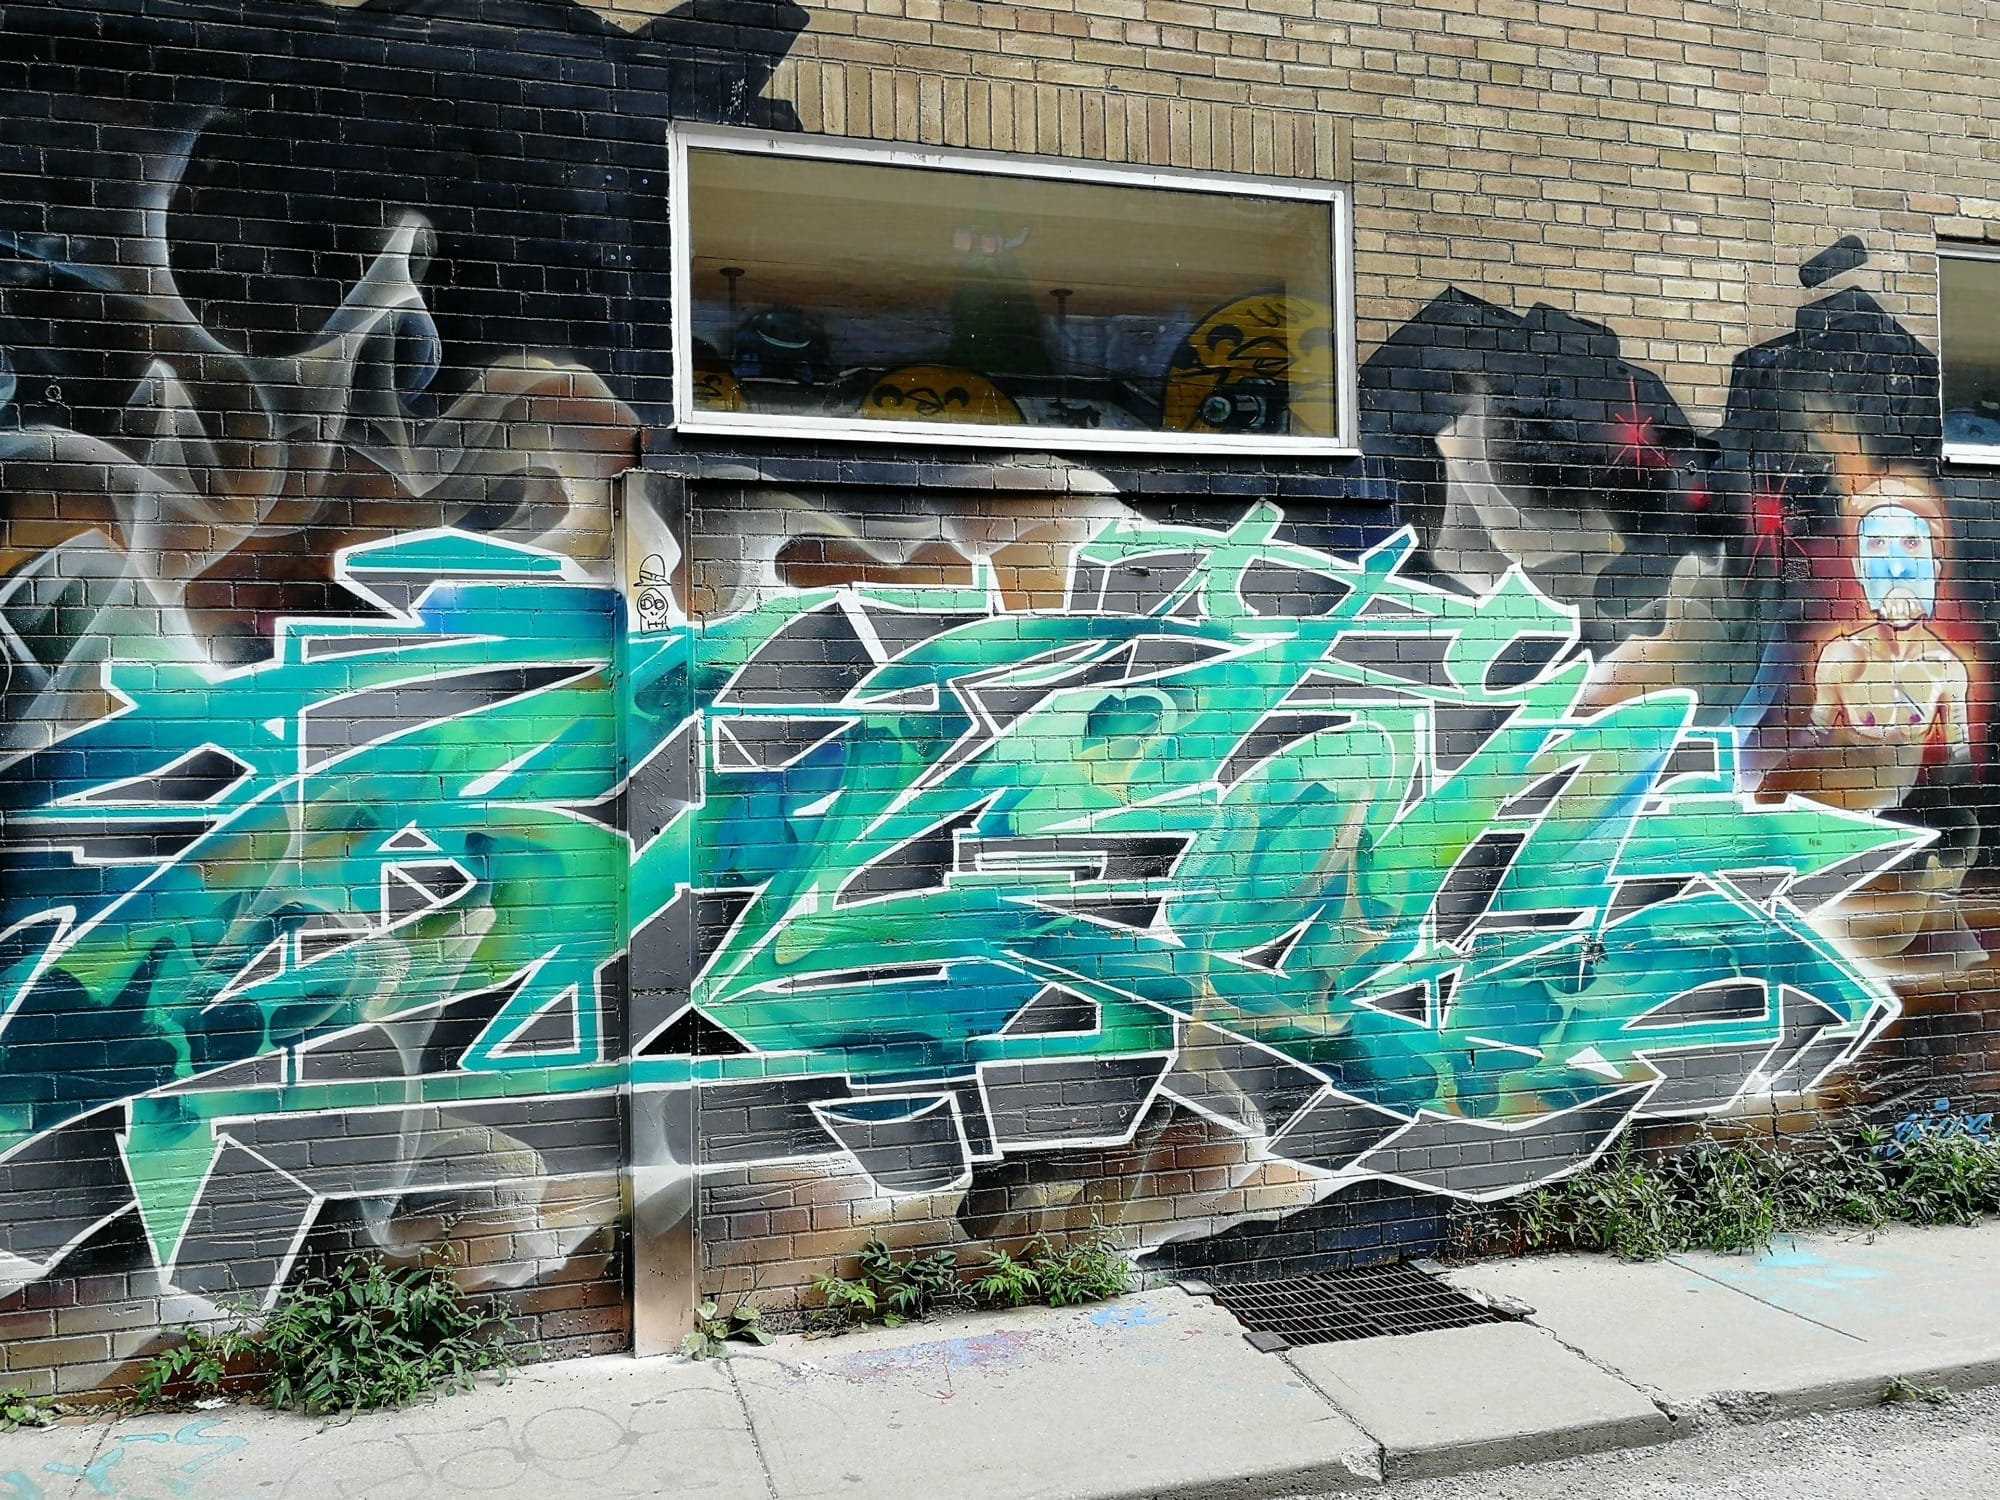 Graffiti 2568  captured by Rabot in Toronto Canada